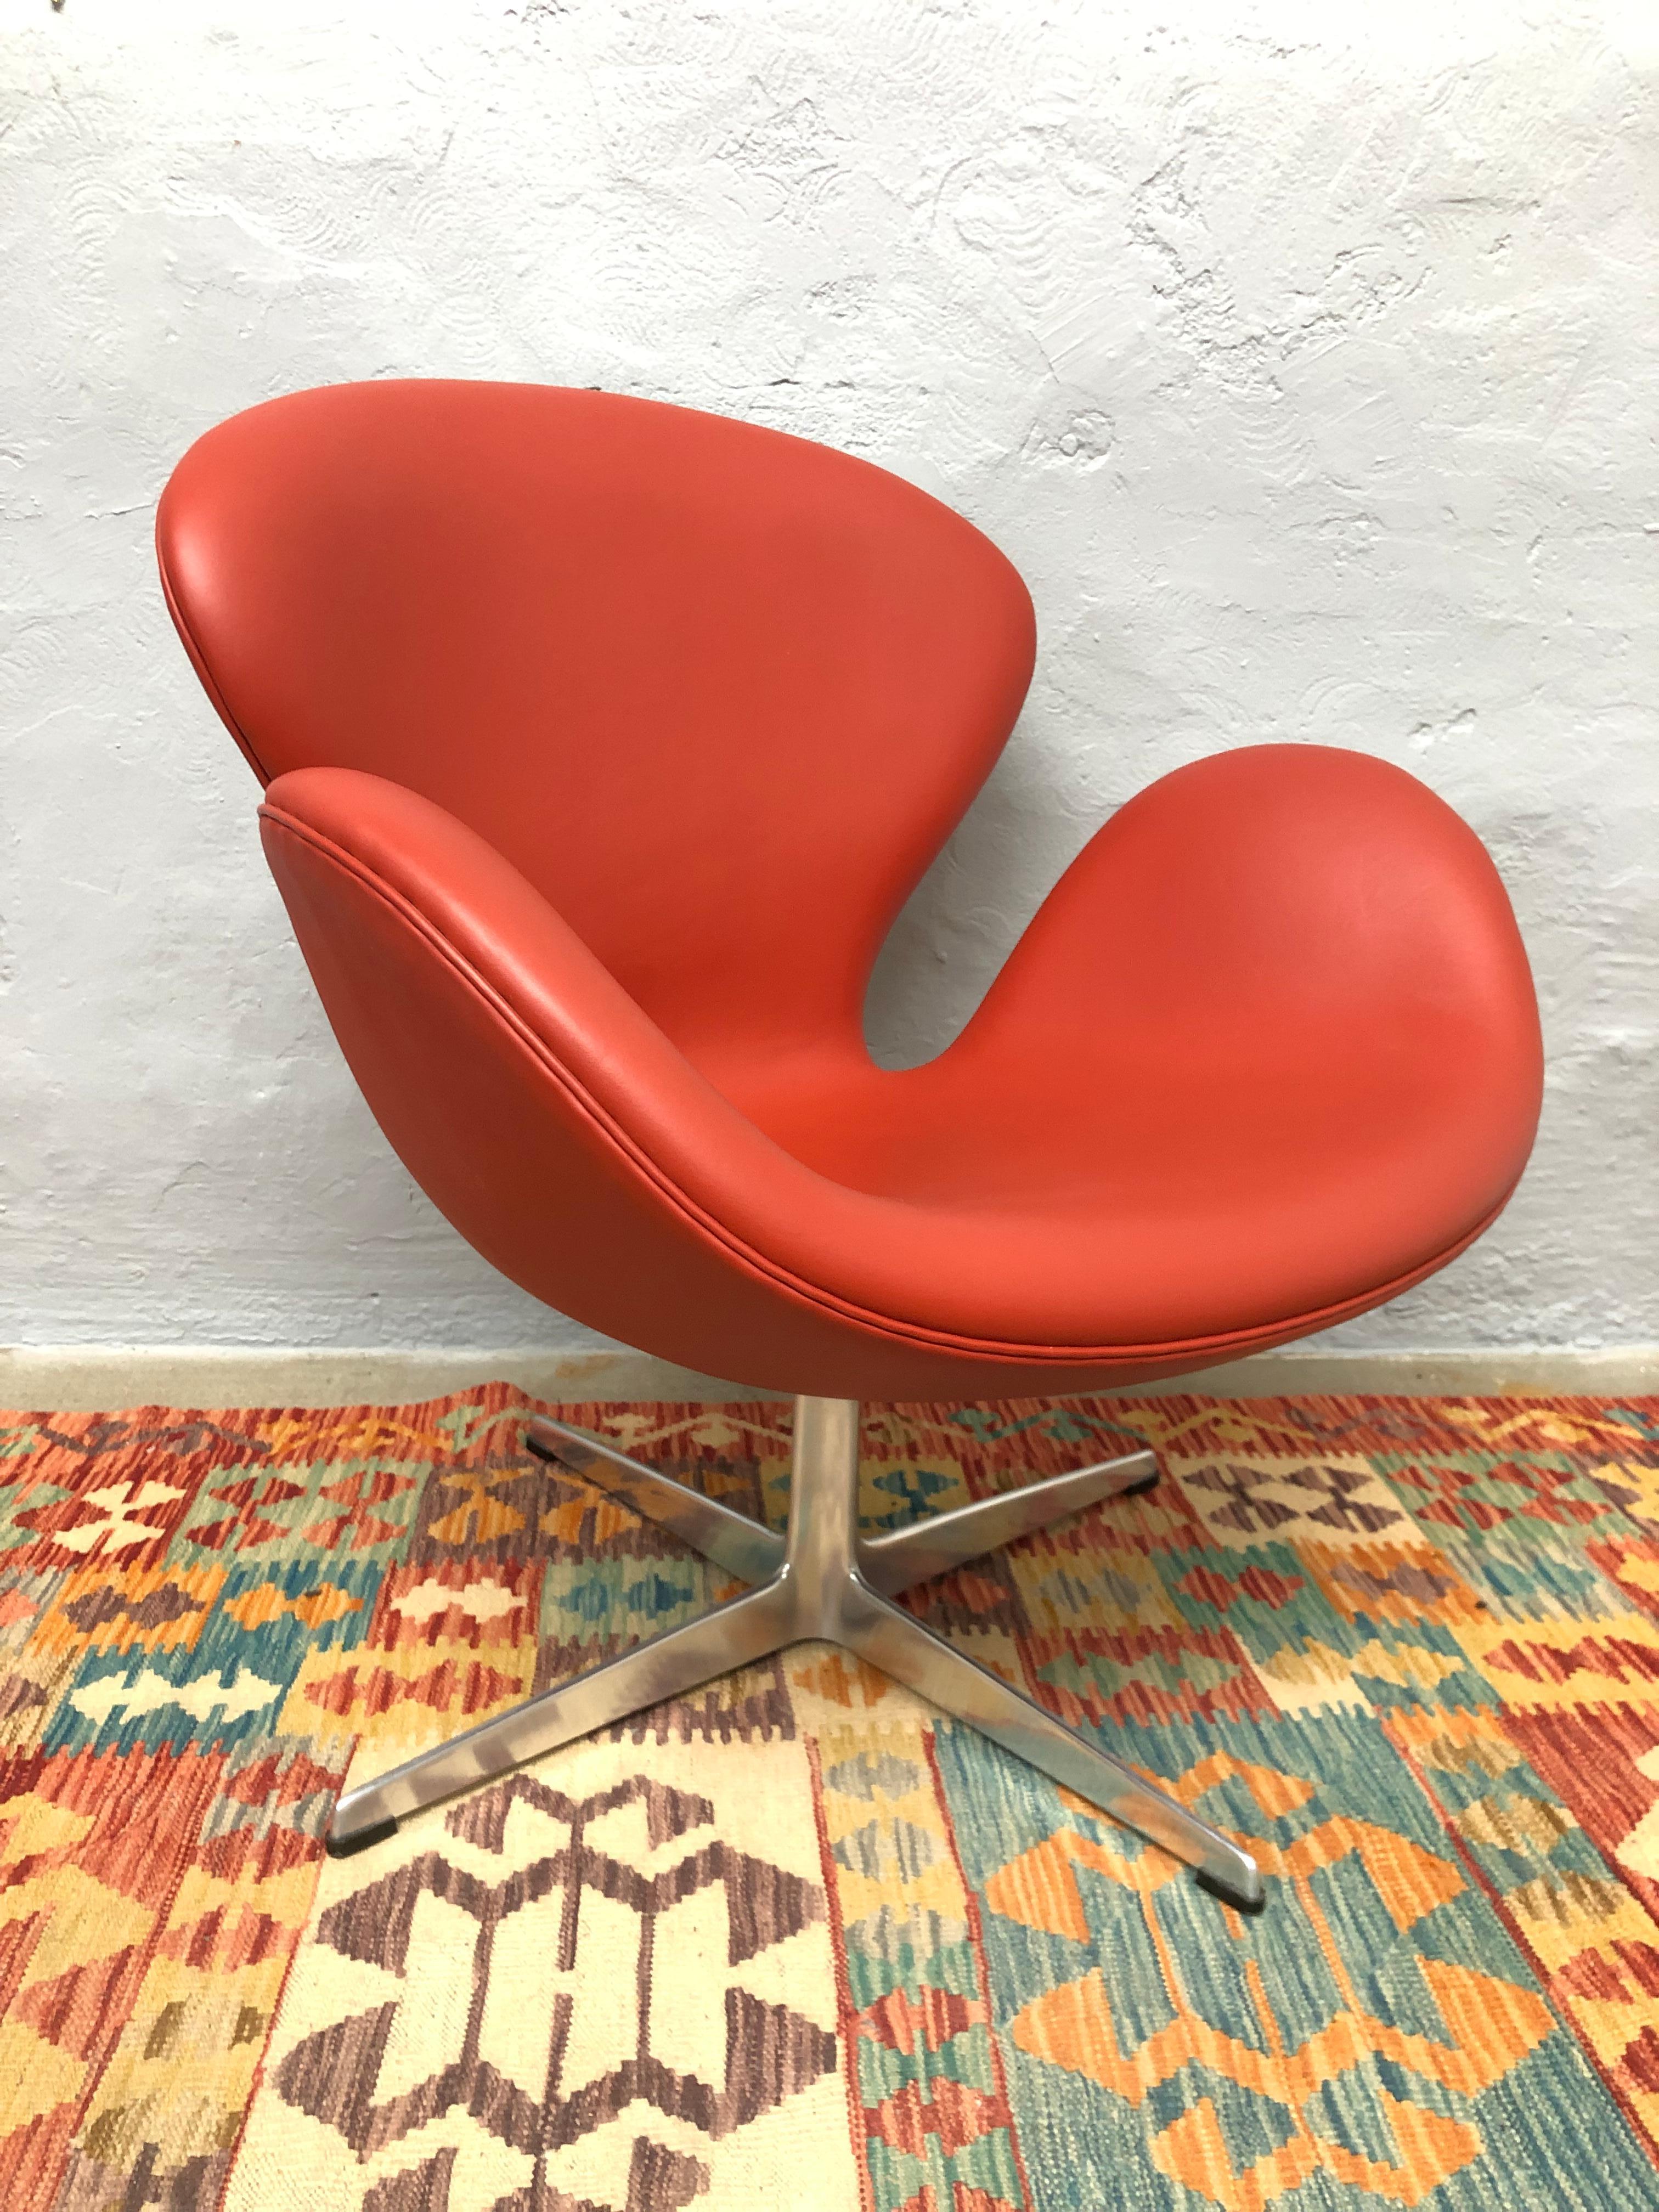 Vintage Iconic First Edition Arne Jacobsen 3320 Lounge Chair Designed in 1958 8